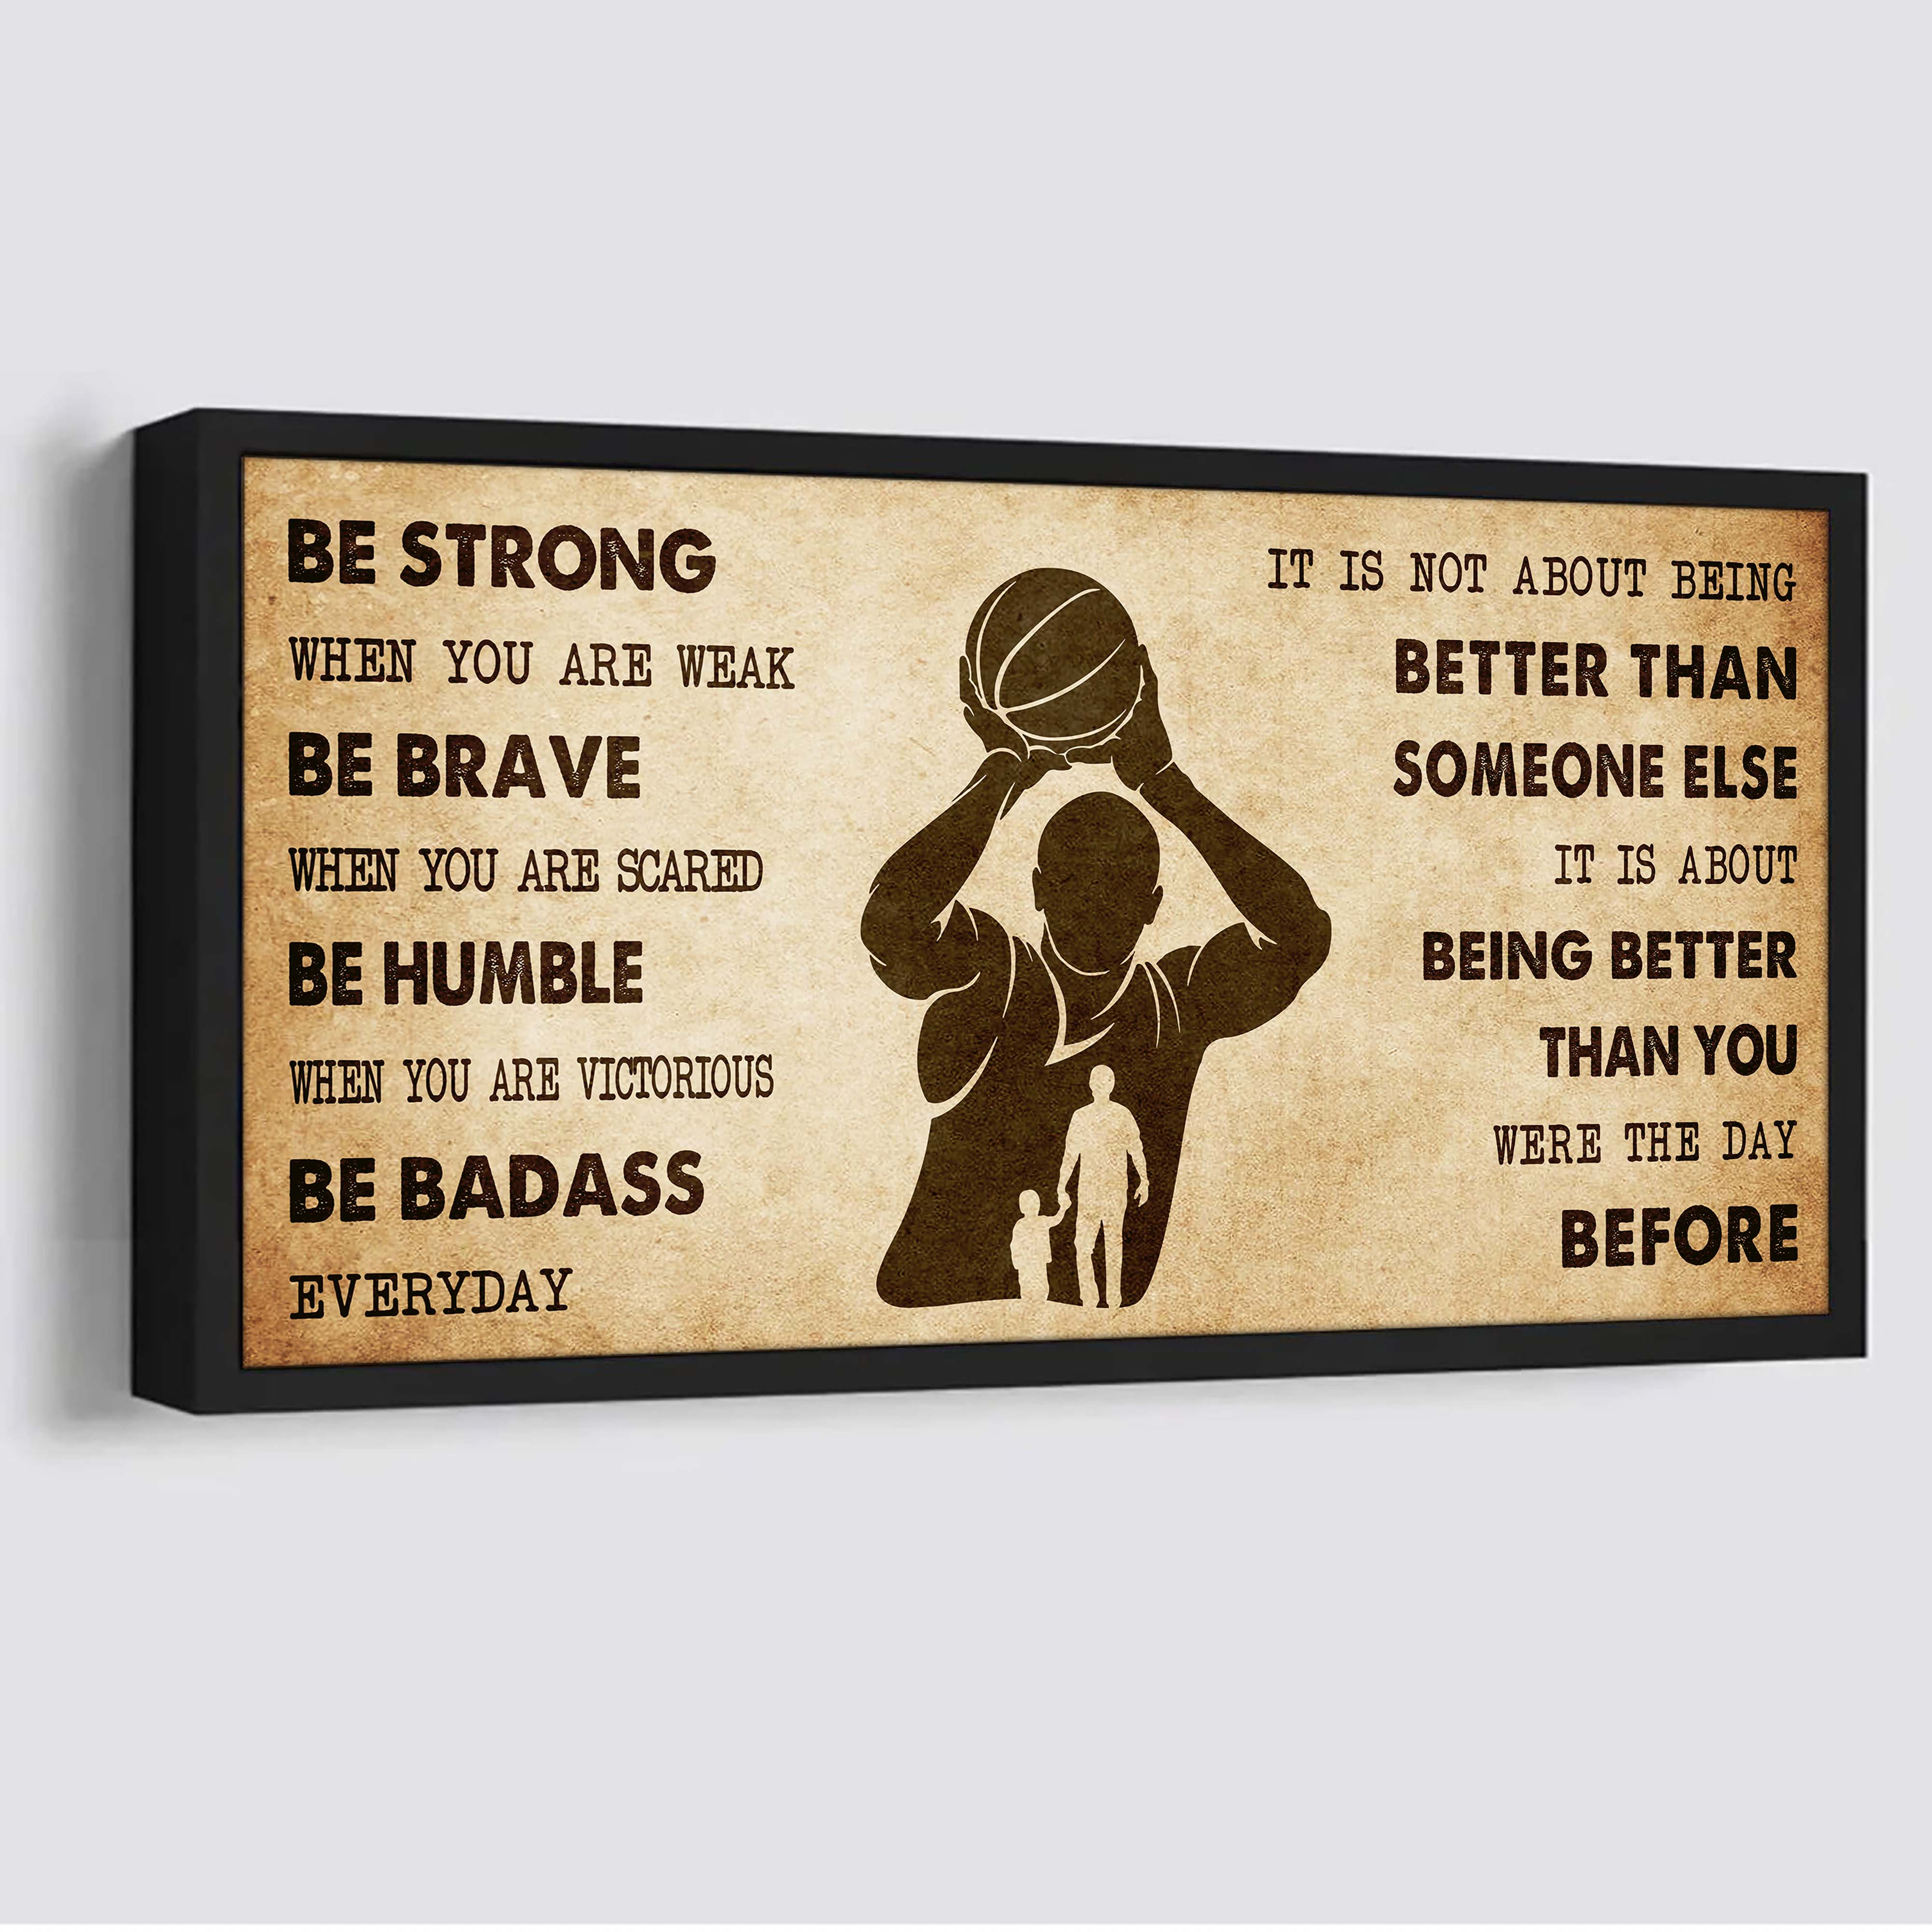 Soccer Poster Canvas From Dad To Son It Is Not About Being Better Than Someone Else - Be Strong When You Are Weak Be Badass Everyday